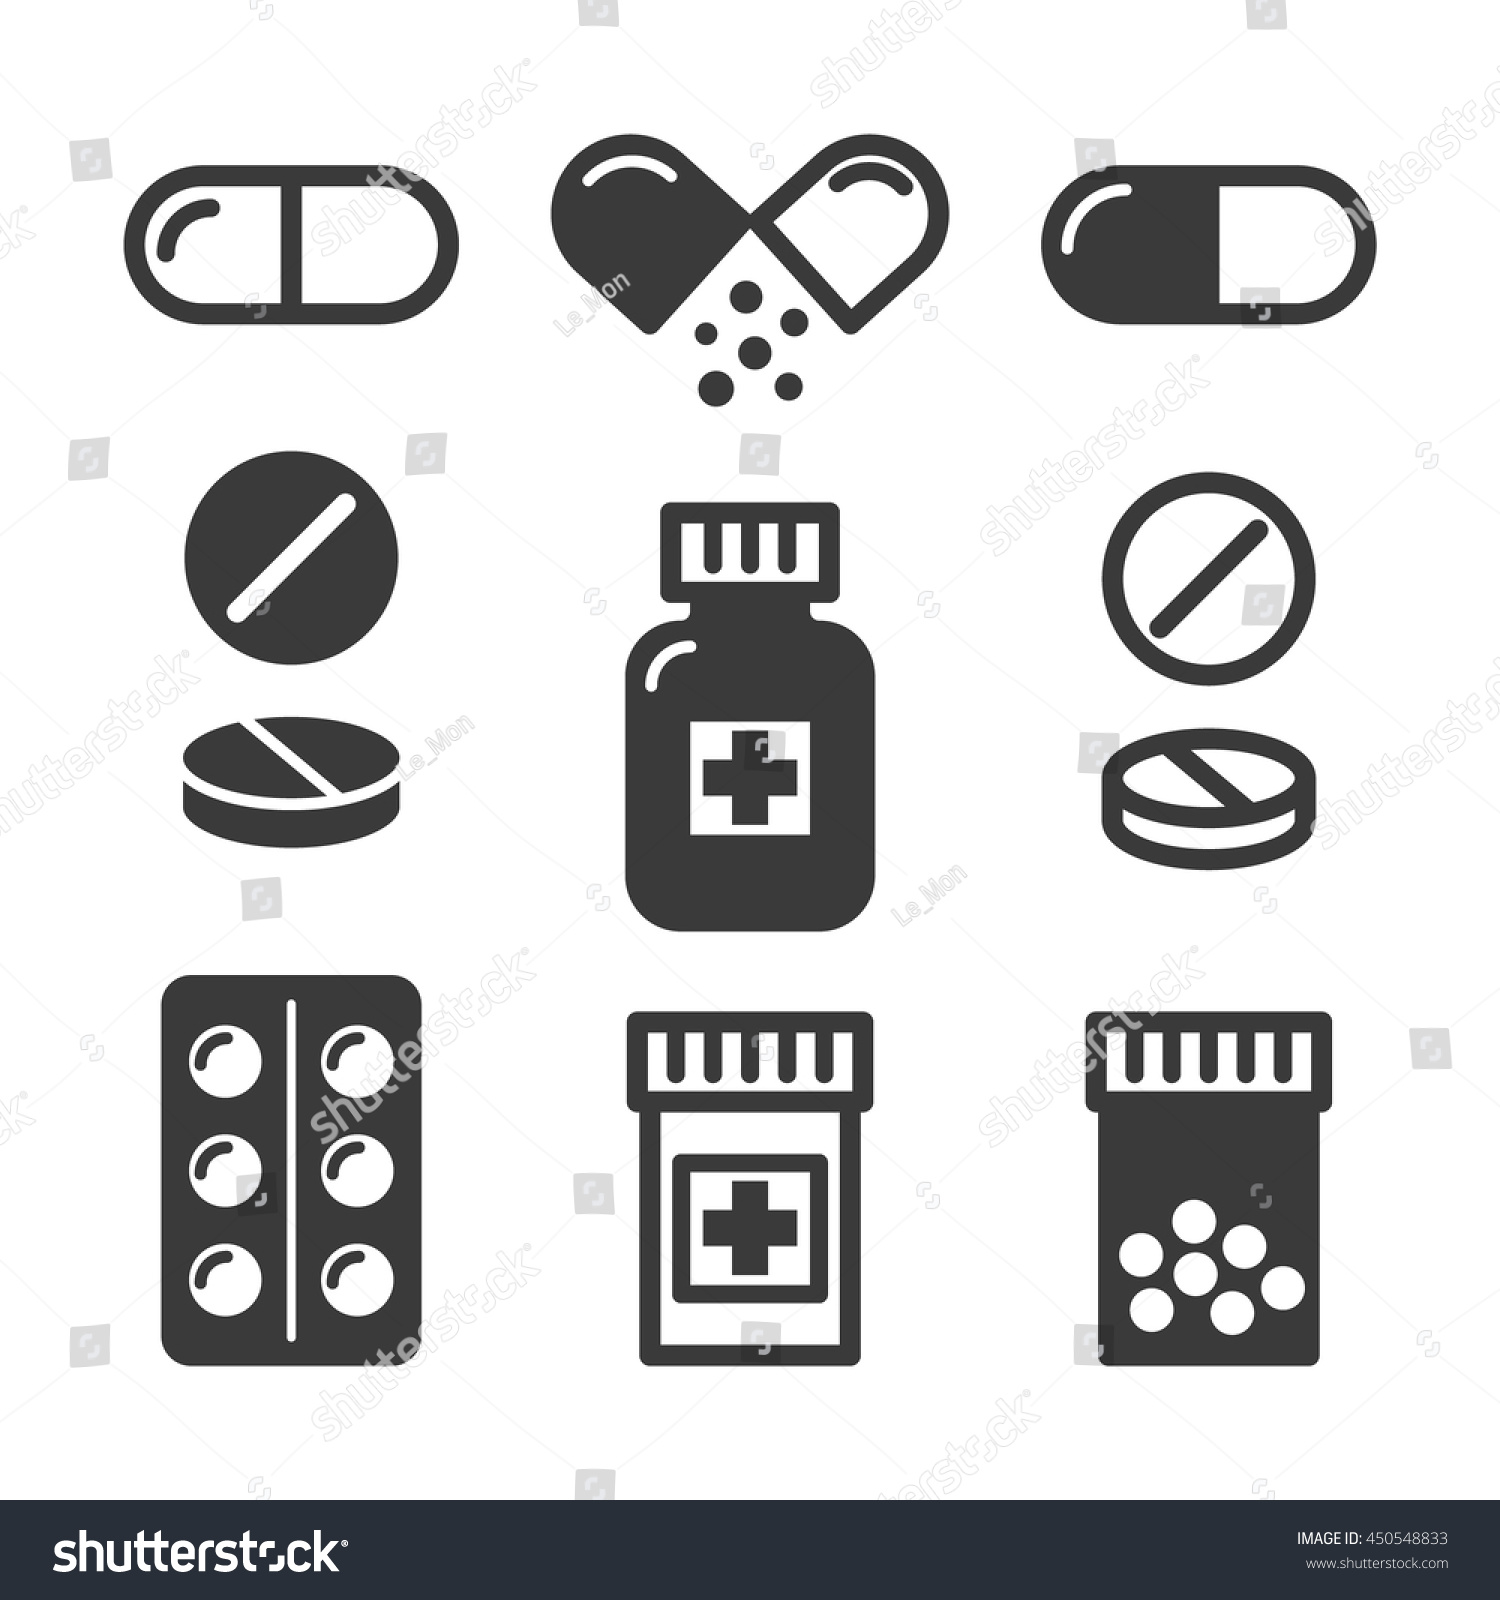 Medical pills and bottles icons set #450548833